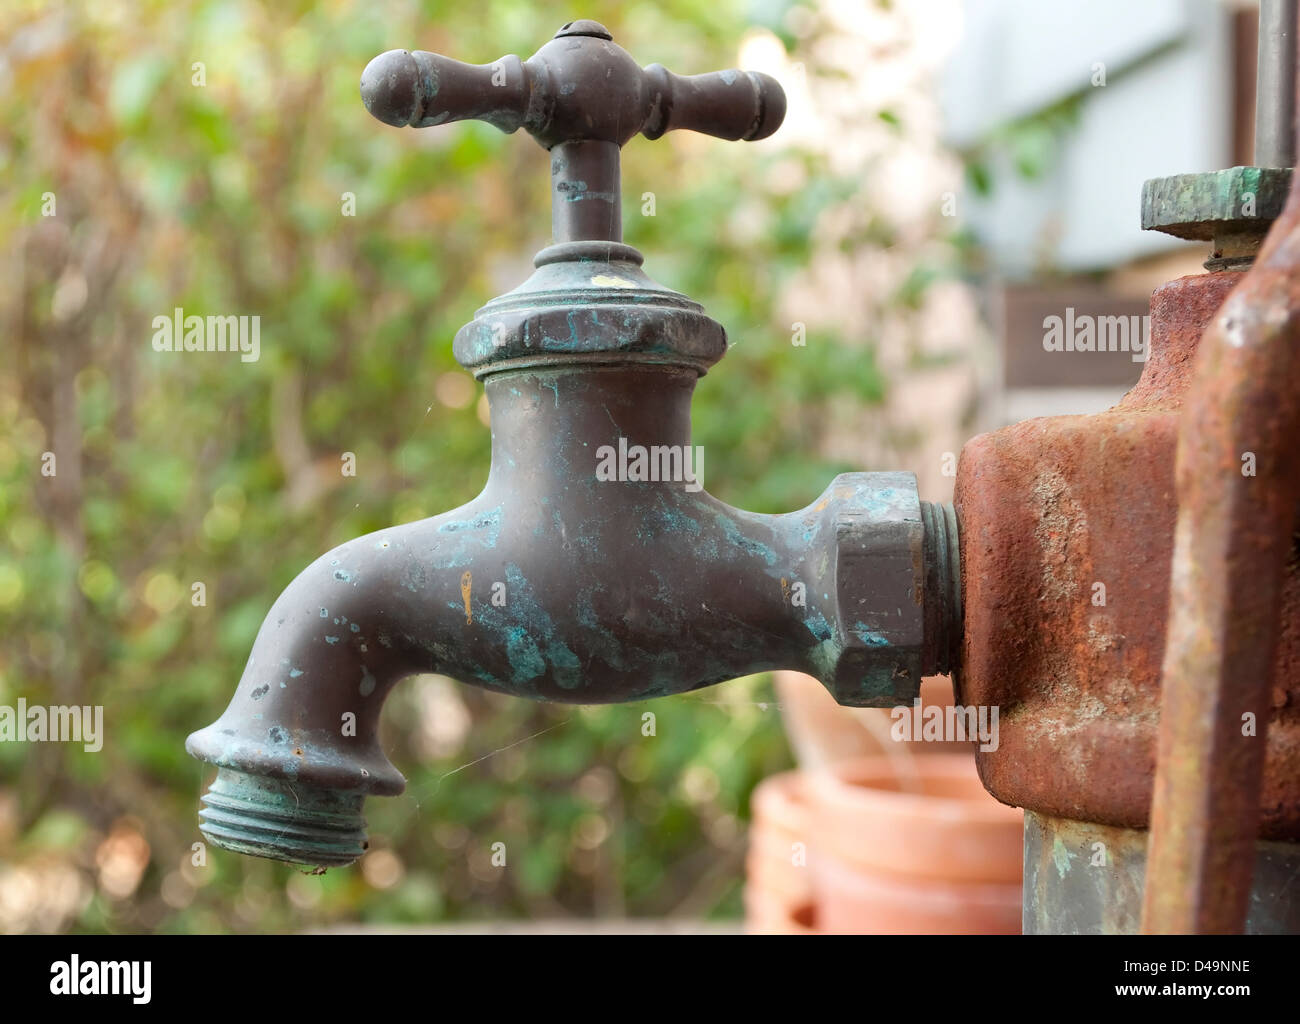 A functional but rusty water spigot Stock Photo